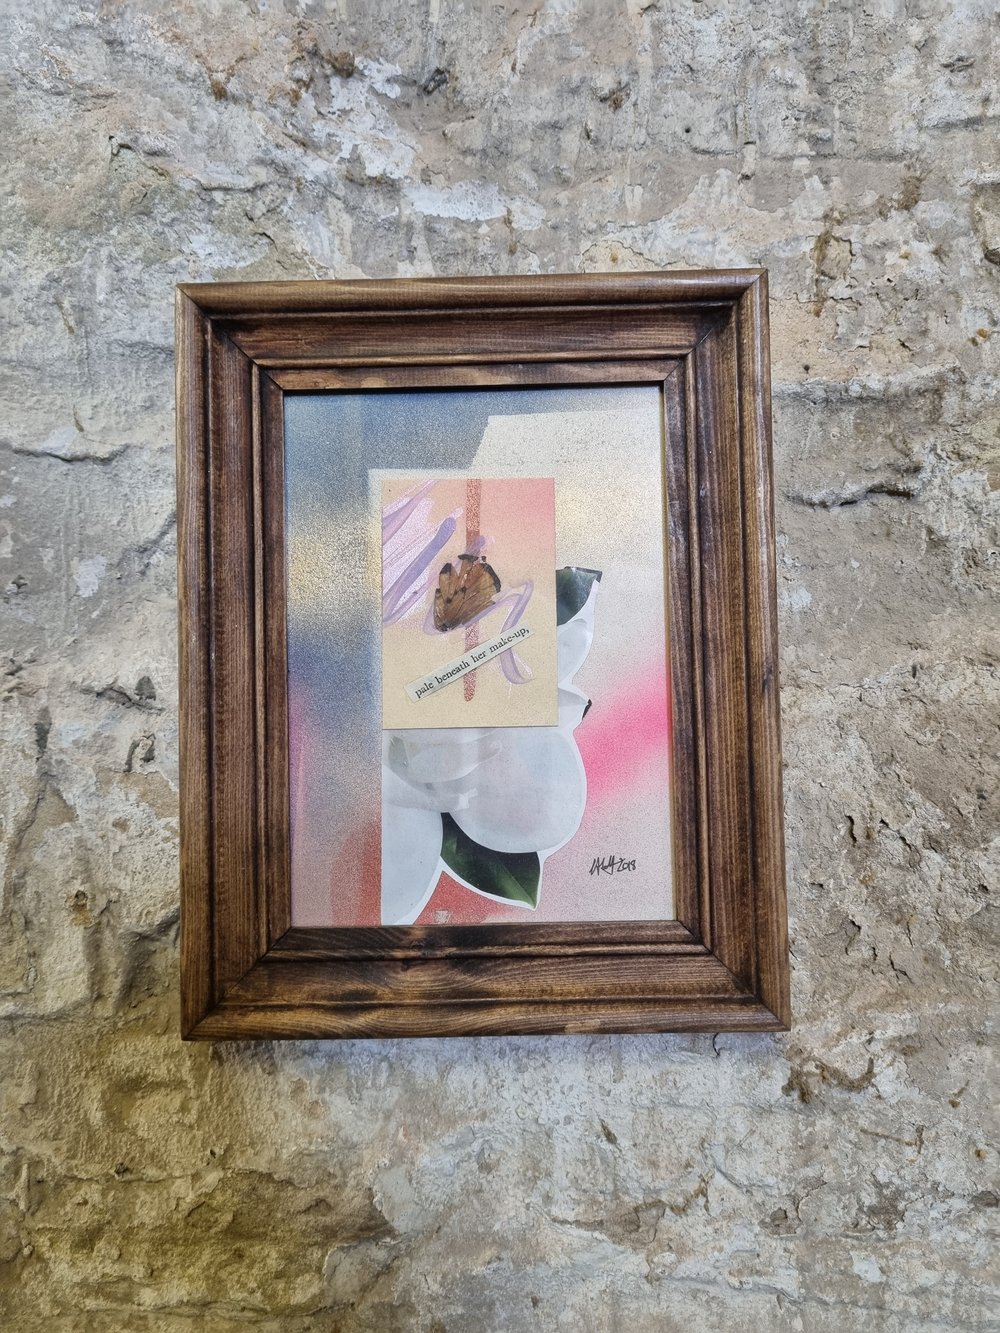 Image of Small One of a kind Mixed Media Framed Collage "Pale Beneath Her Makeup" 2018